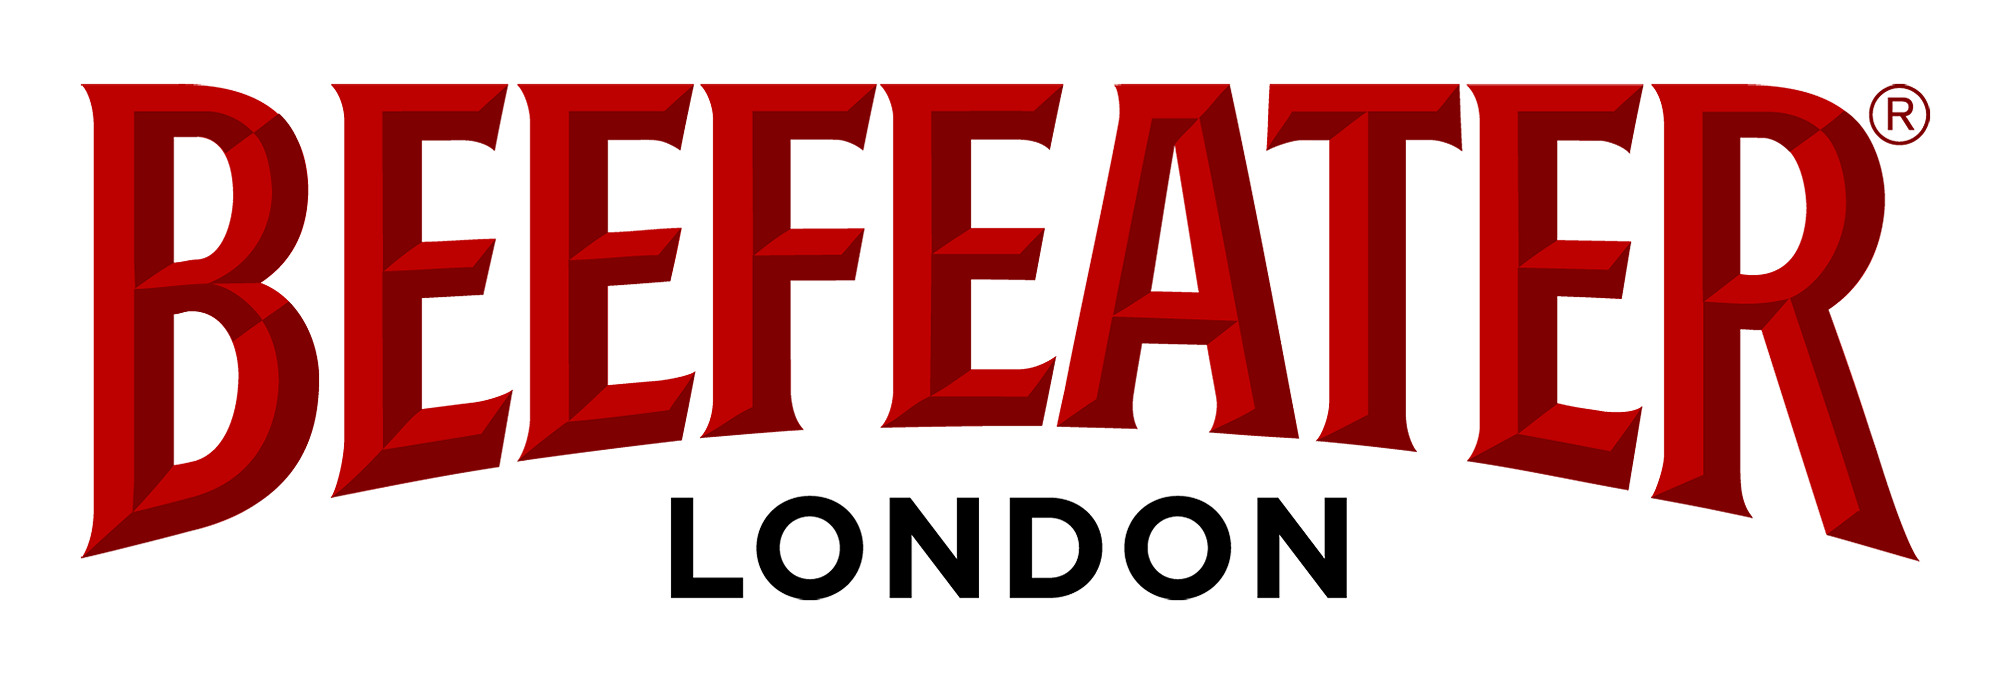 Beefeater London Dry Gin Logo png icons